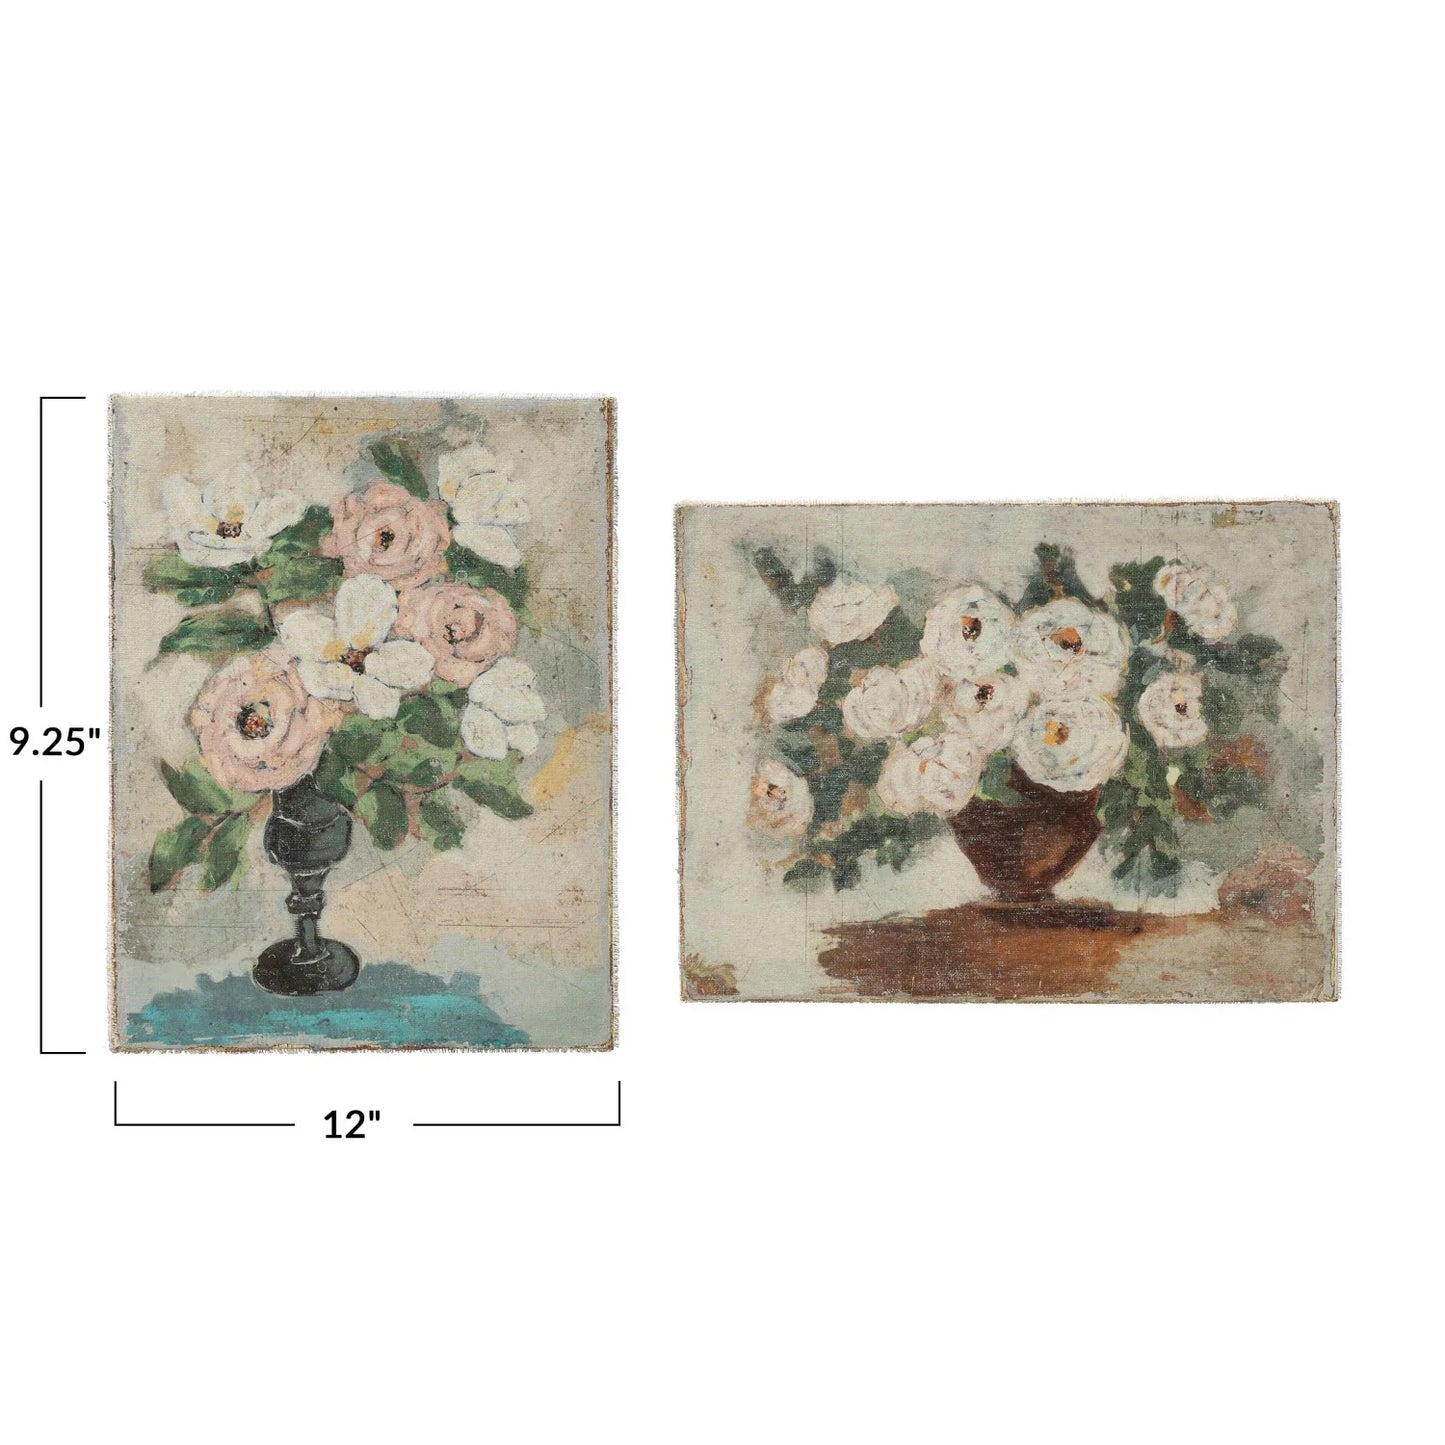 Measurements of the canvas wall decor with flowers in vase.